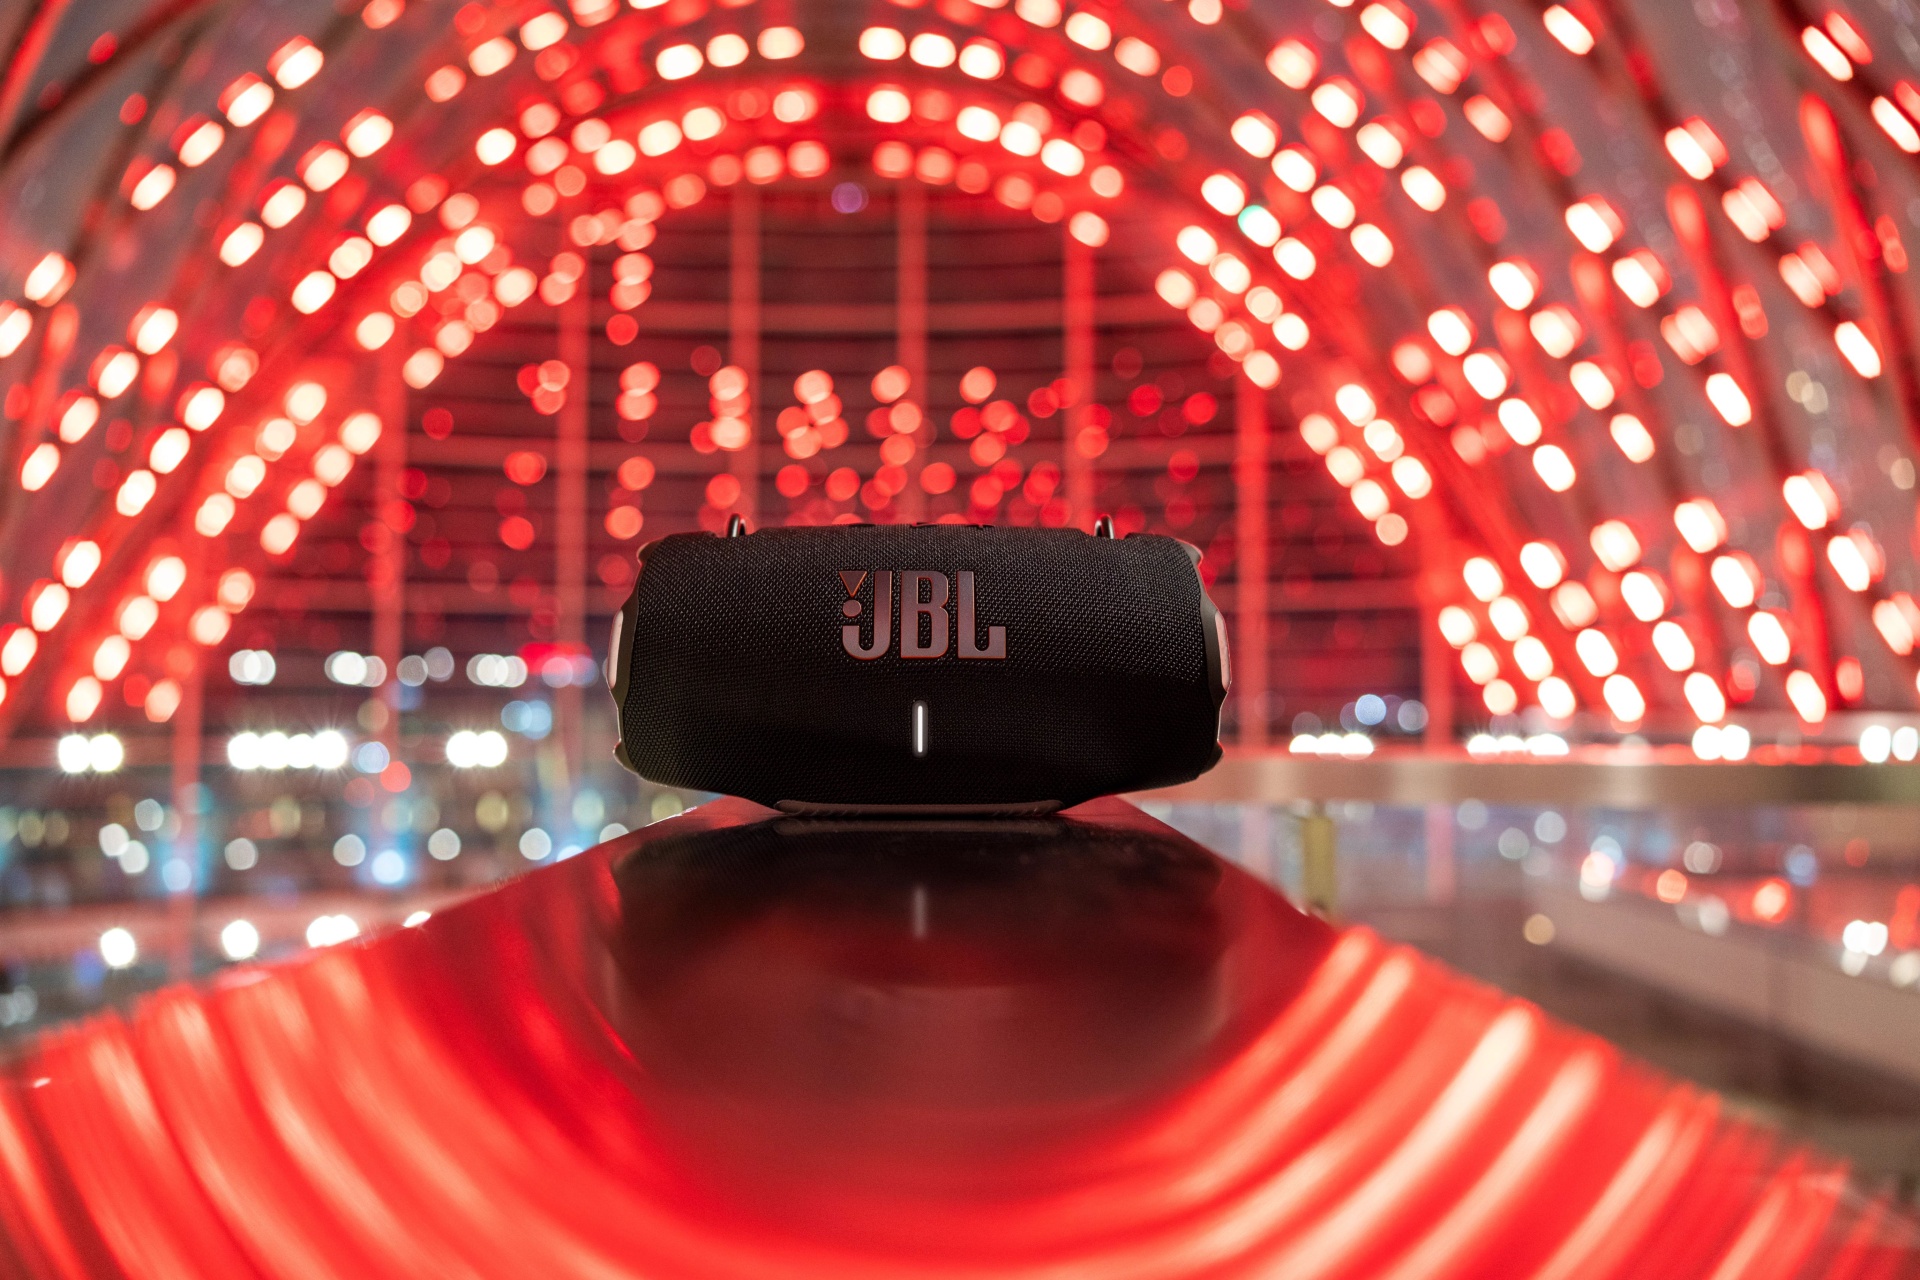 JBL brings the boom with upgraded portables and party speakers